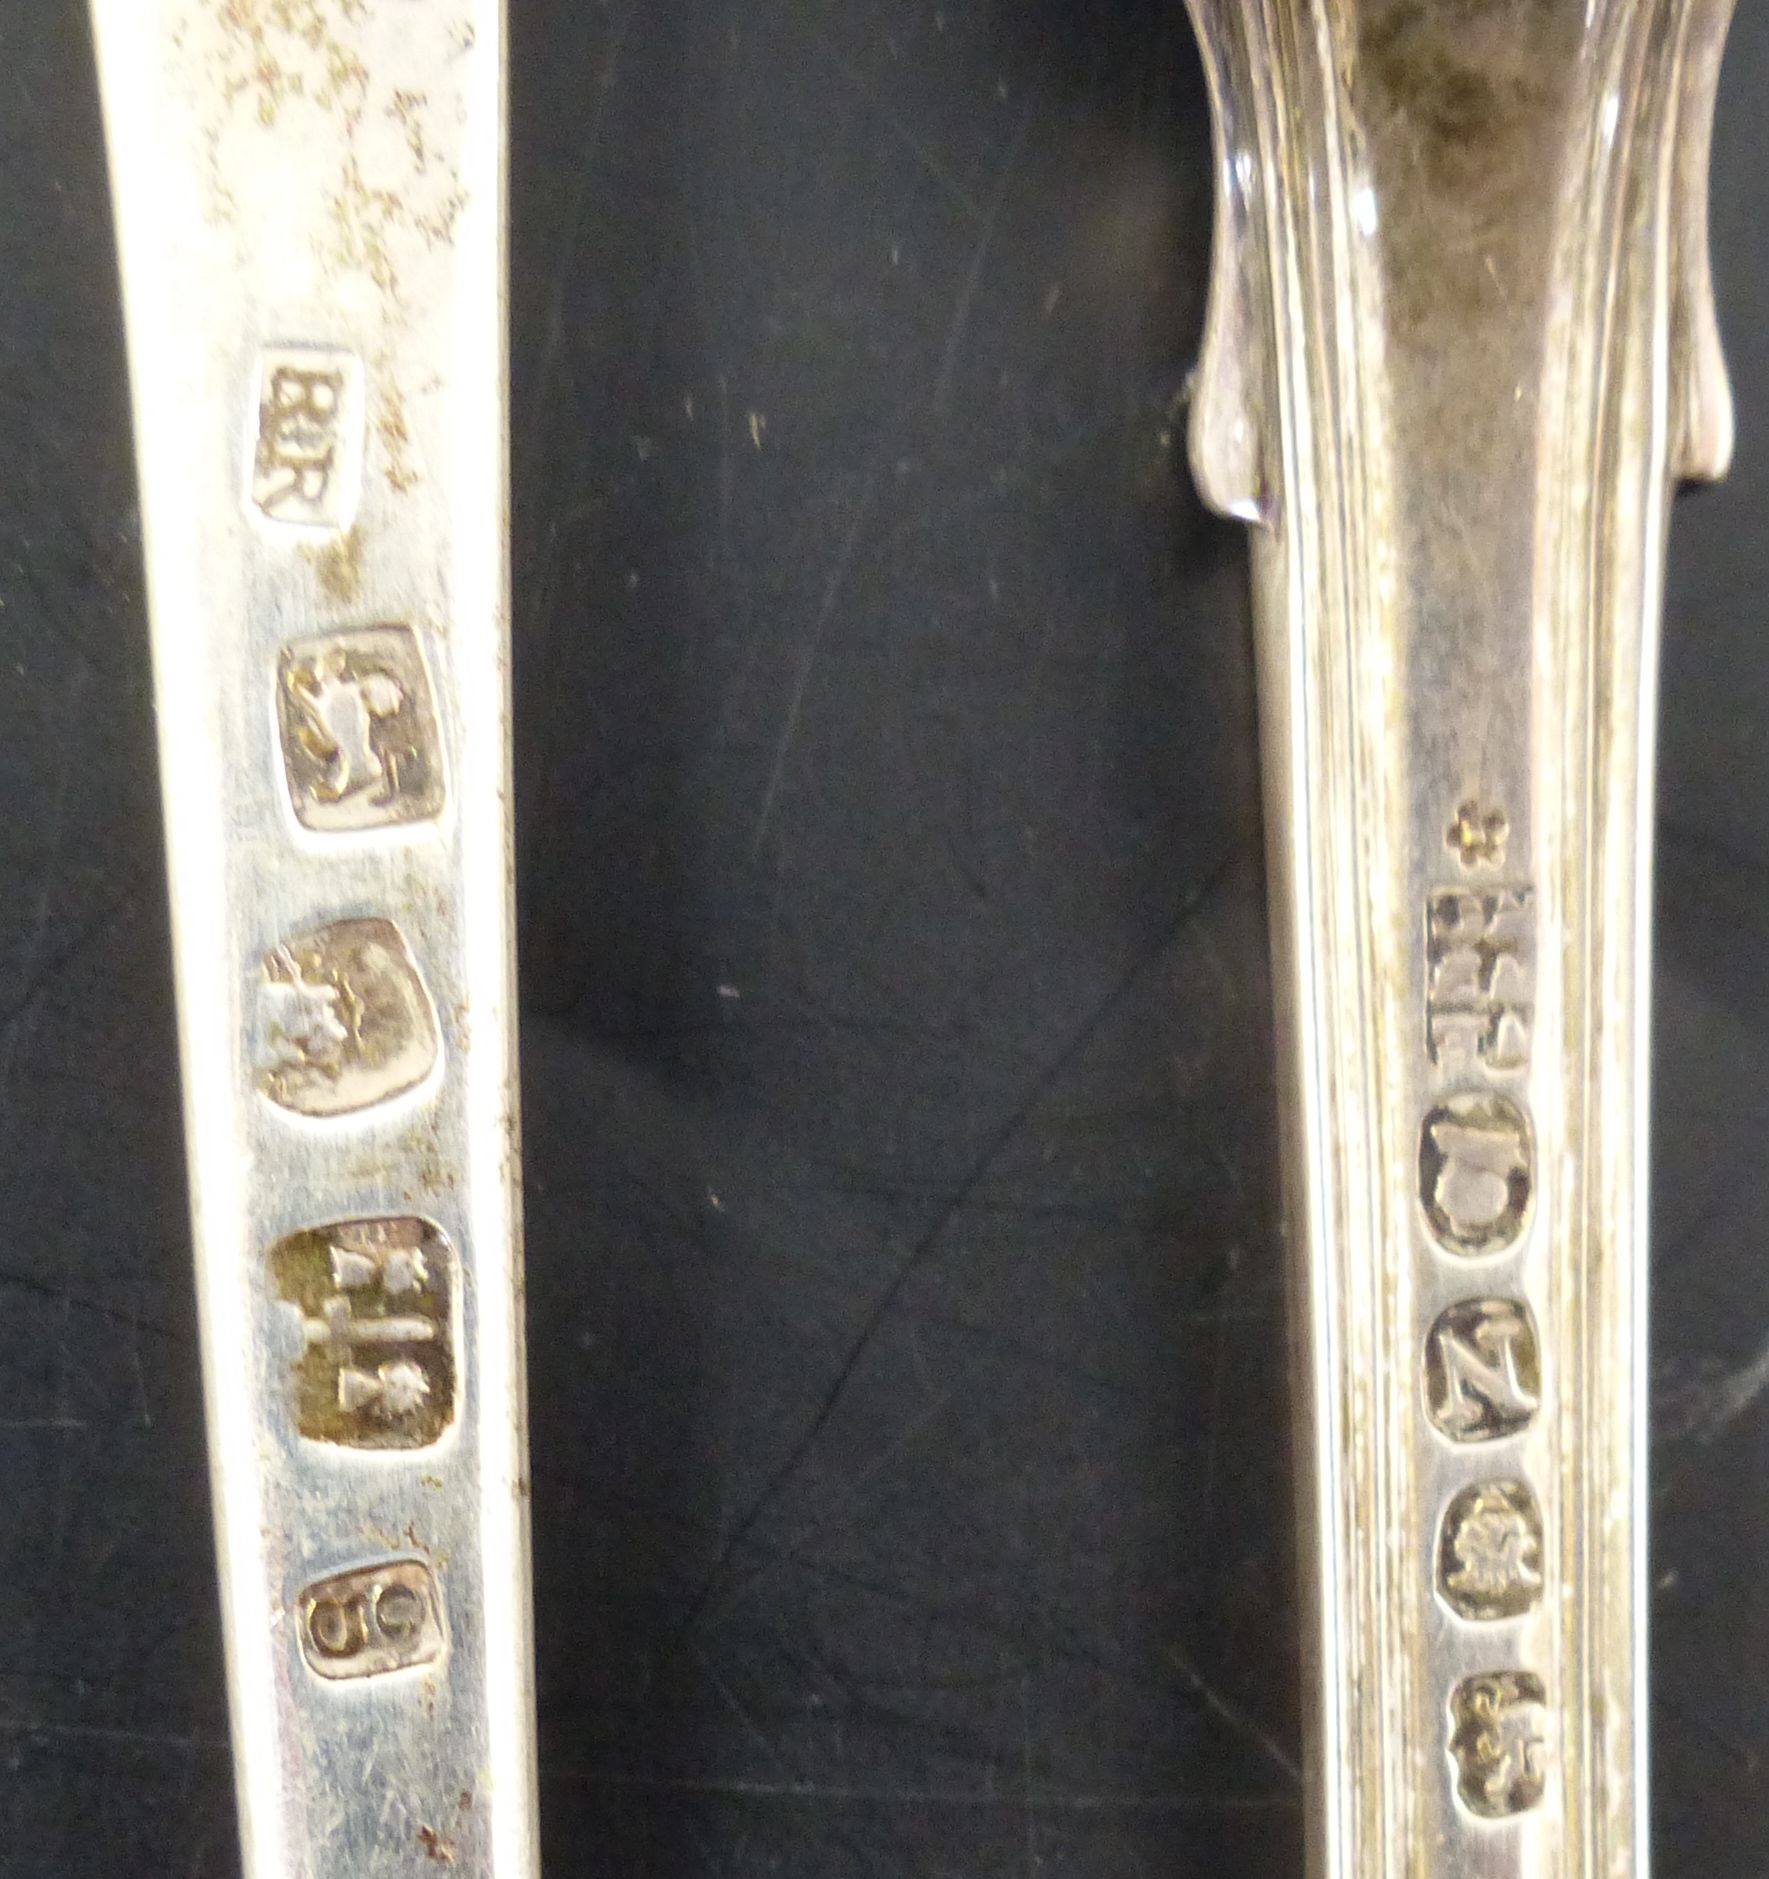 Two 19th century silver marrow scoops, thread pattern by Eley, Fearn & Chawner, London, 1808 and - Image 7 of 7